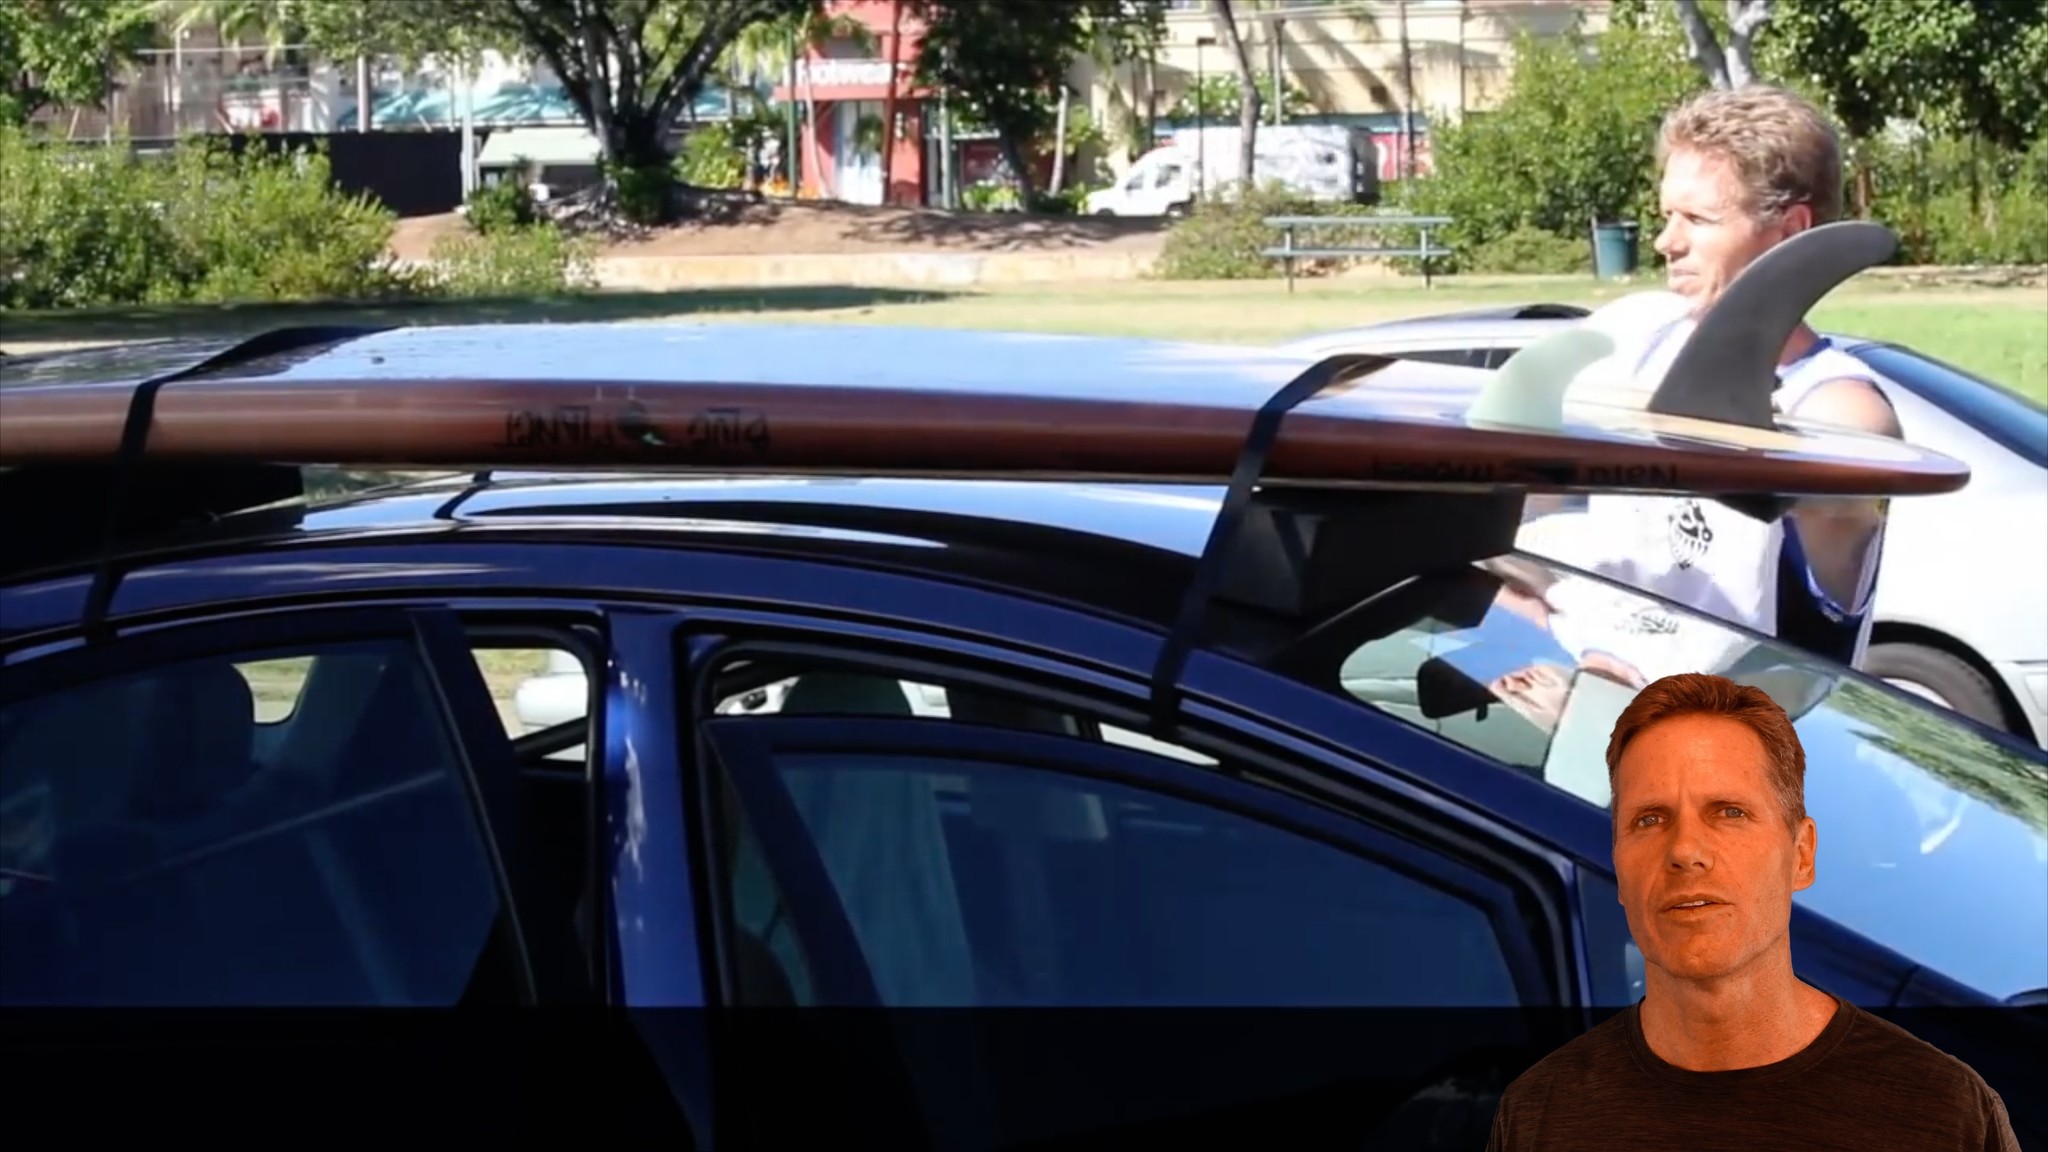 How to hang the board on the car without a roof rack?